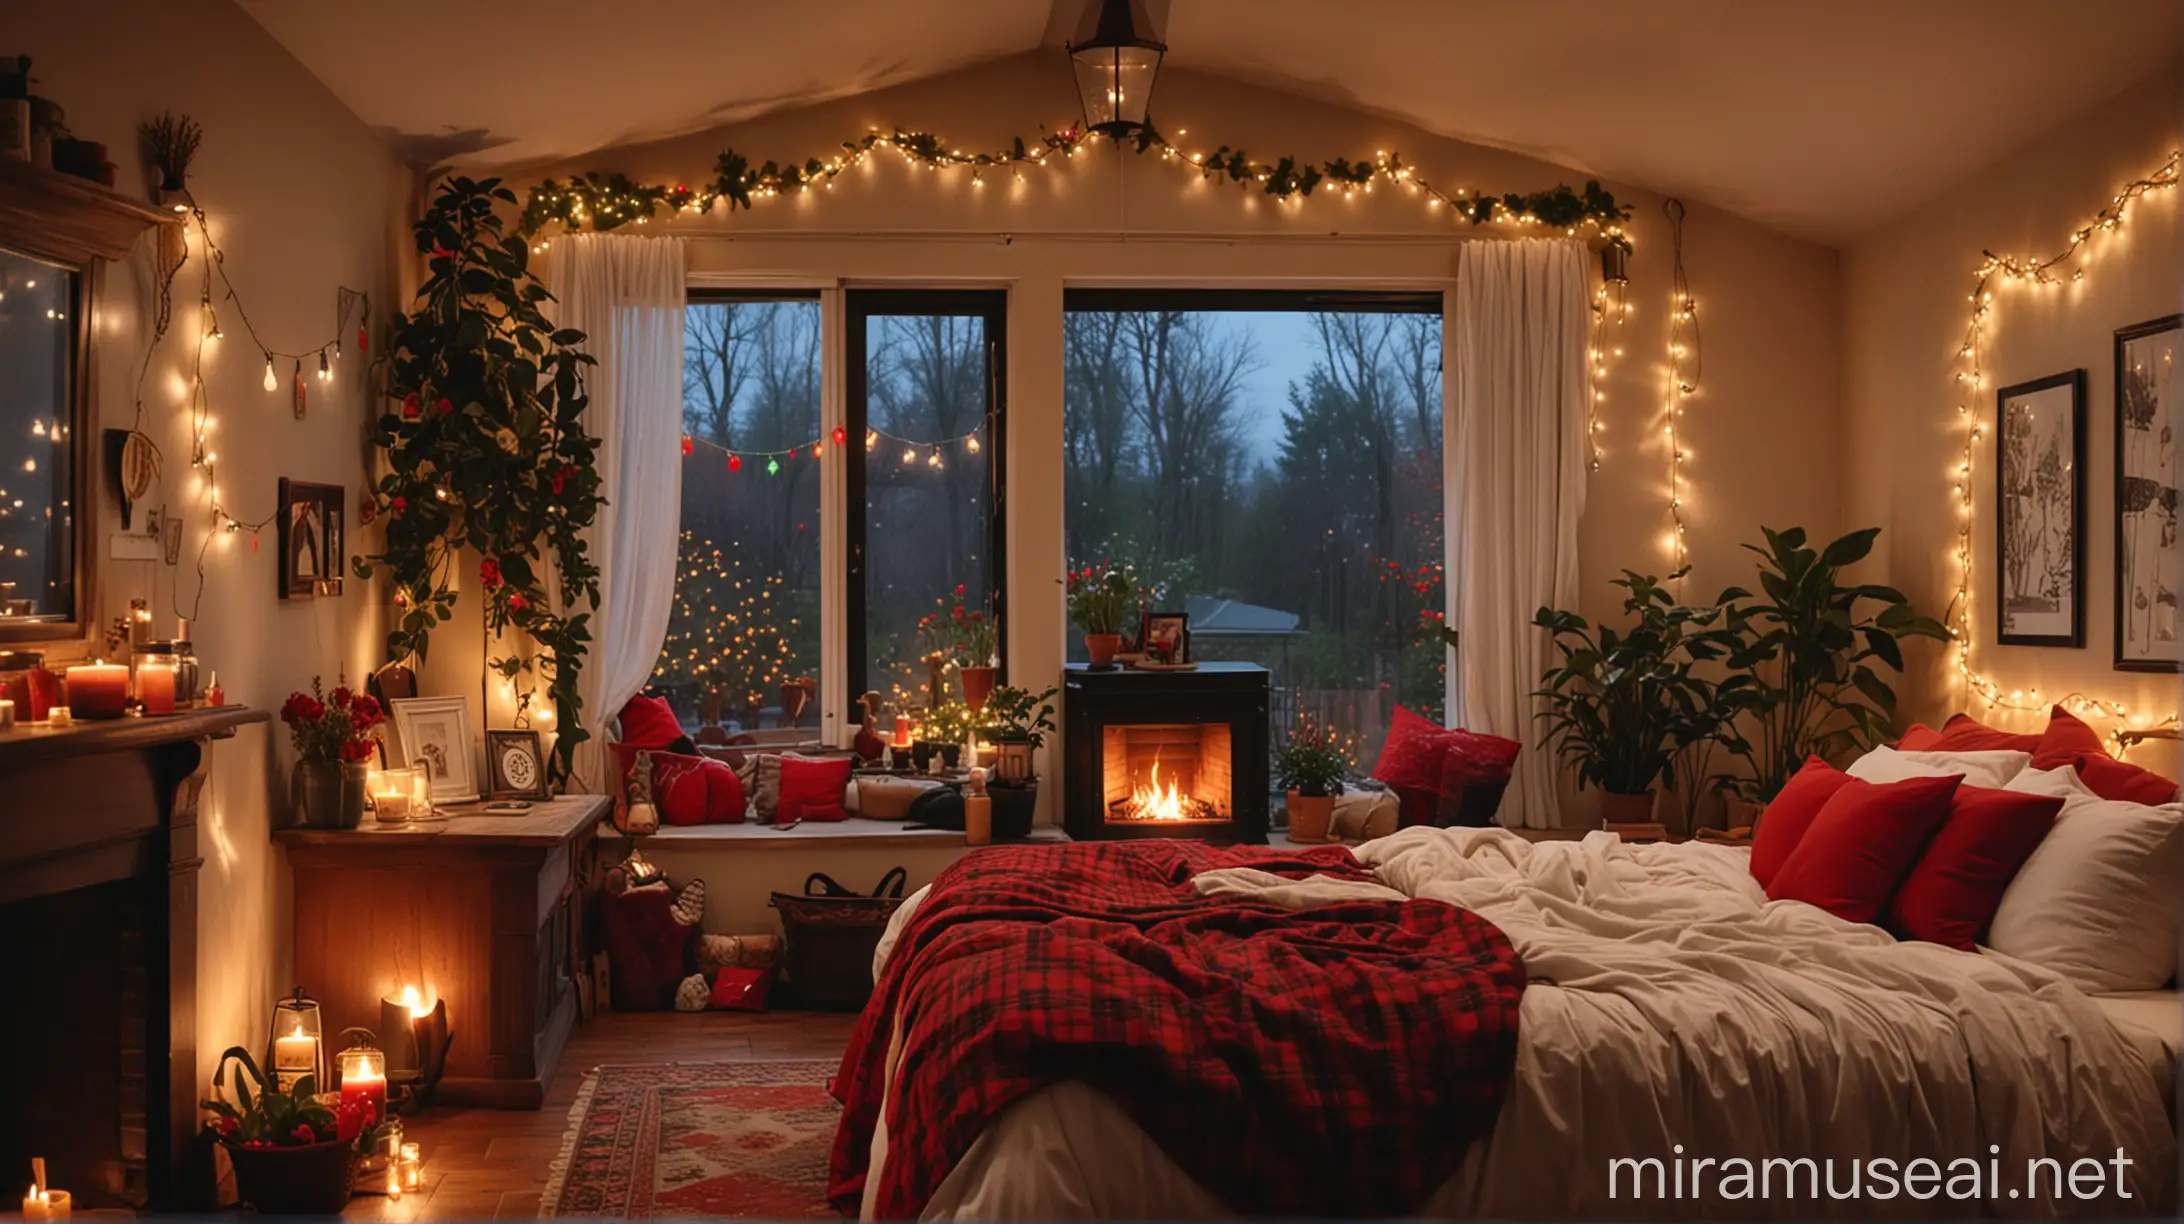  inside, with two small cozy plant, pillows, string lights,badroom, a fireplace, big window with a rainy fall night deep, nighttime, night light, warm candle room, fireplace large box, large bad, arafed bad room, with a fireplace box and a red 